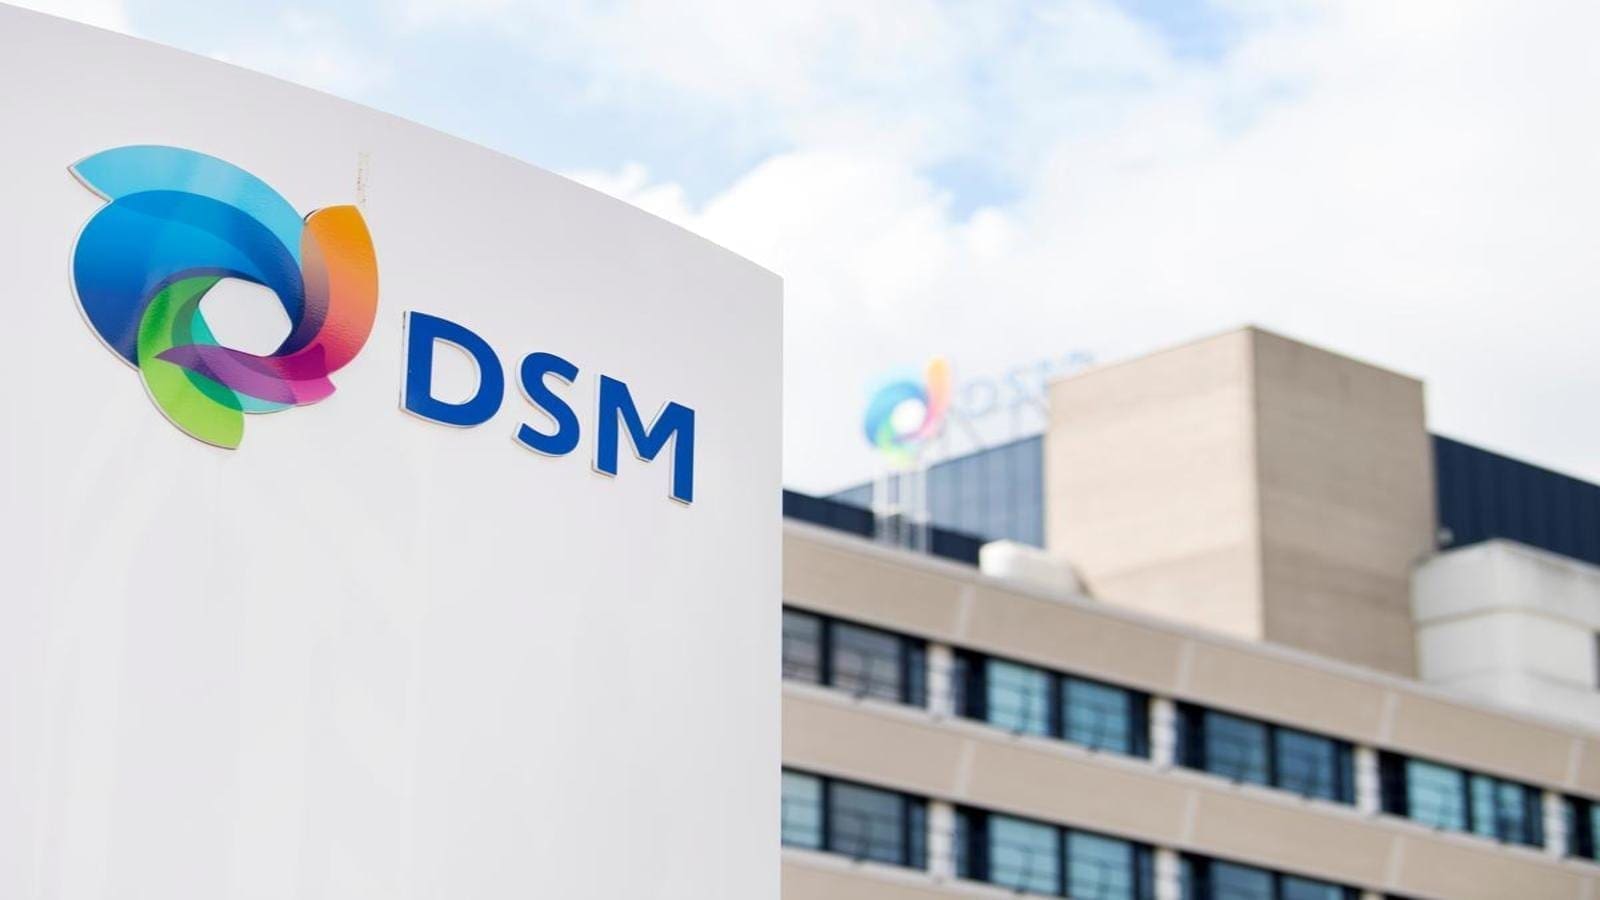 DSM upcycles canola meal into high quality protein isolate for use in plant-based foods and beverages</strong>